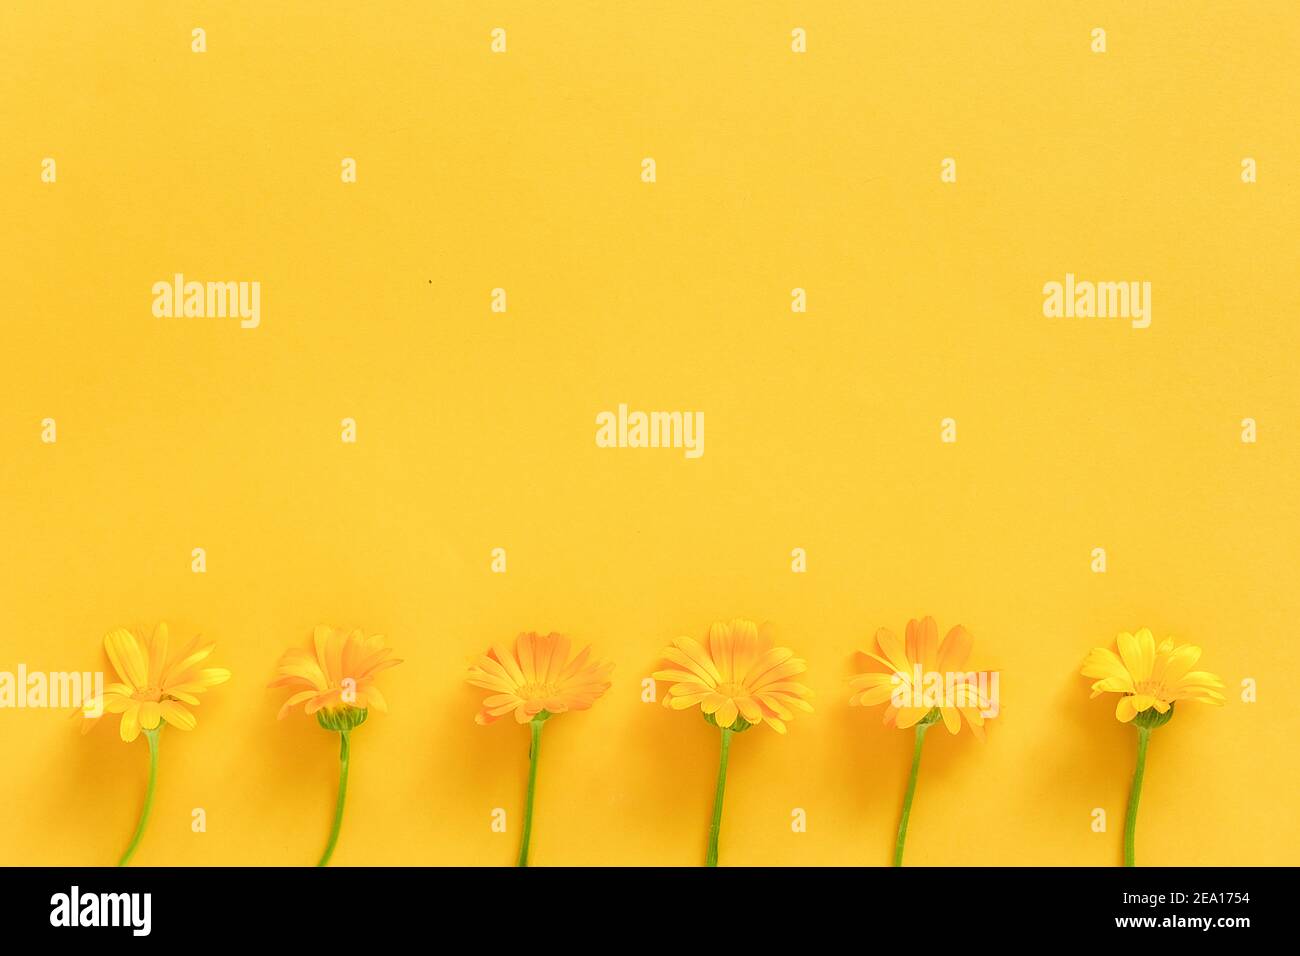 Border made with orange calendula flowers on yellow background. Concept Hello spring or summer Template for design, greeting card, invitation, postcar Stock Photo